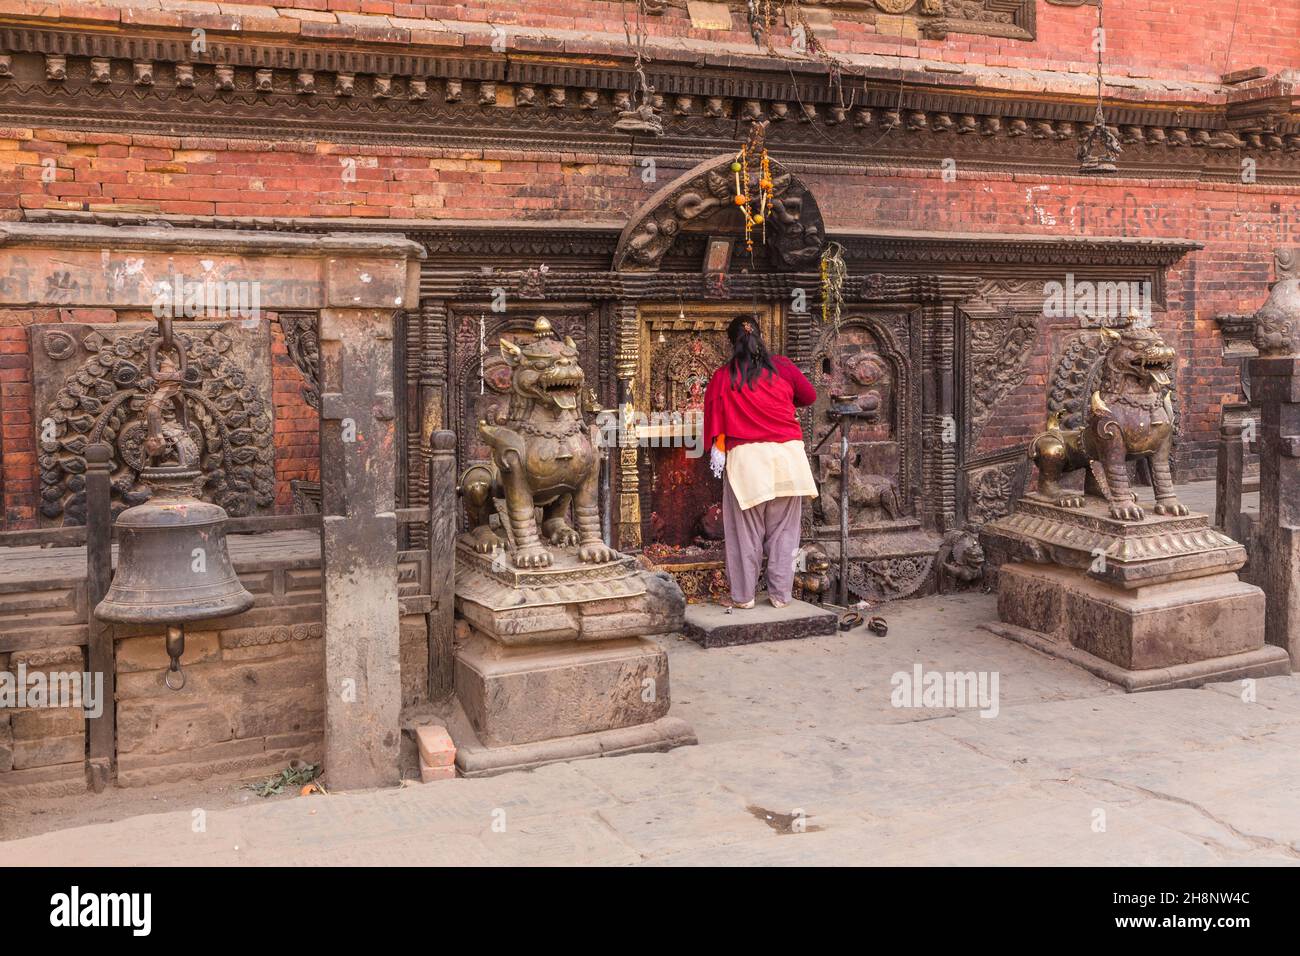 A Nepali woman wearing a salwar kameez worshipping at the Bhairab Nath Temple in Bhaktapur, Nepal. Stock Photo